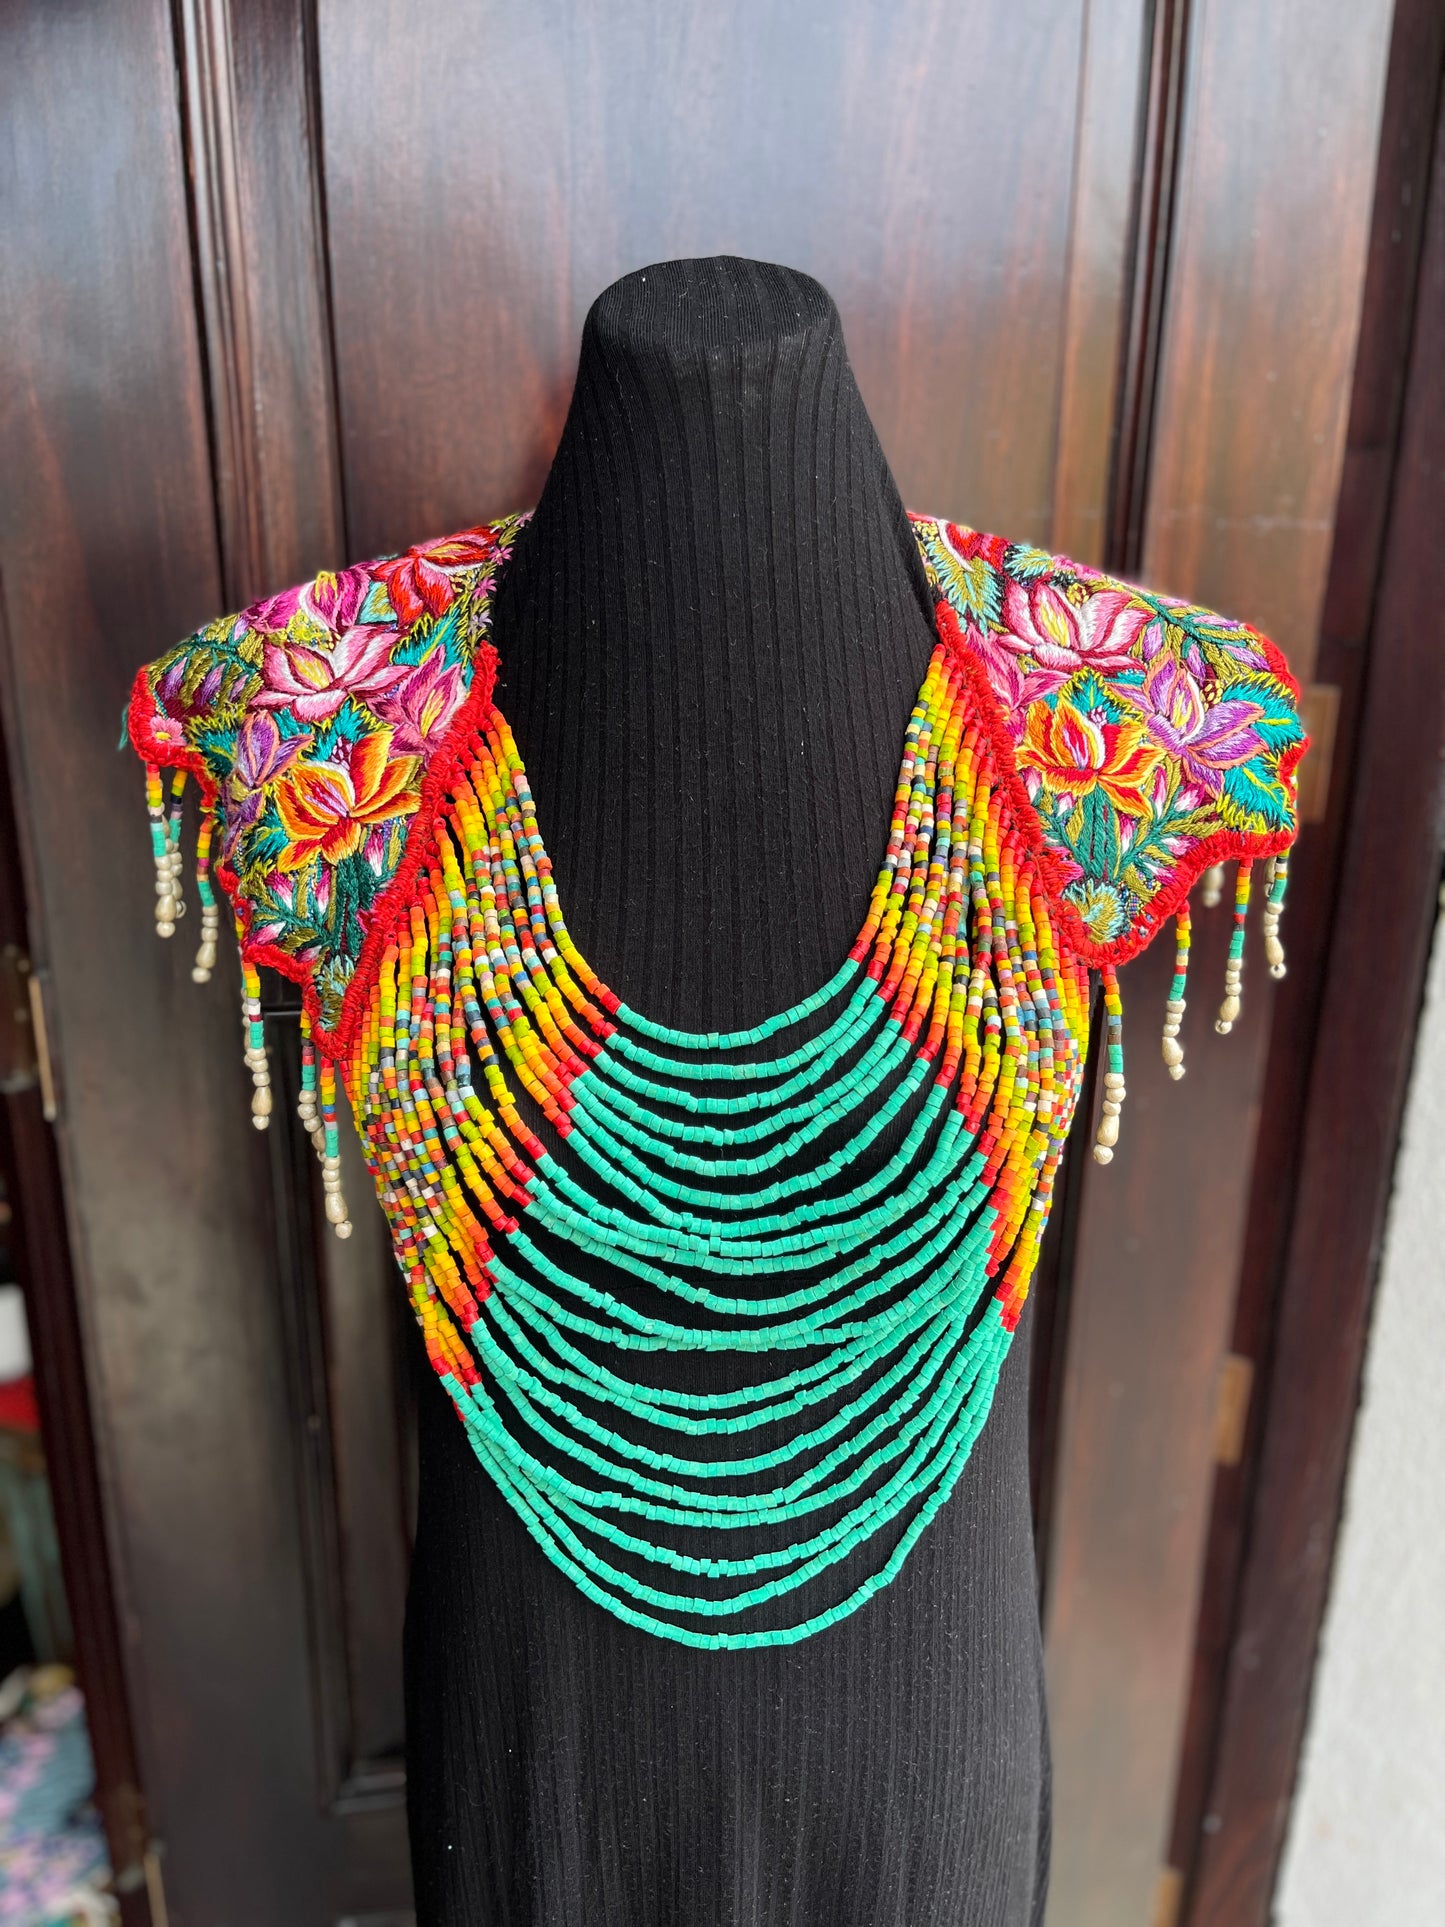 Textile Cape with Beaded Body Chains - "Huipil Capa", Vibrant Flora, Small